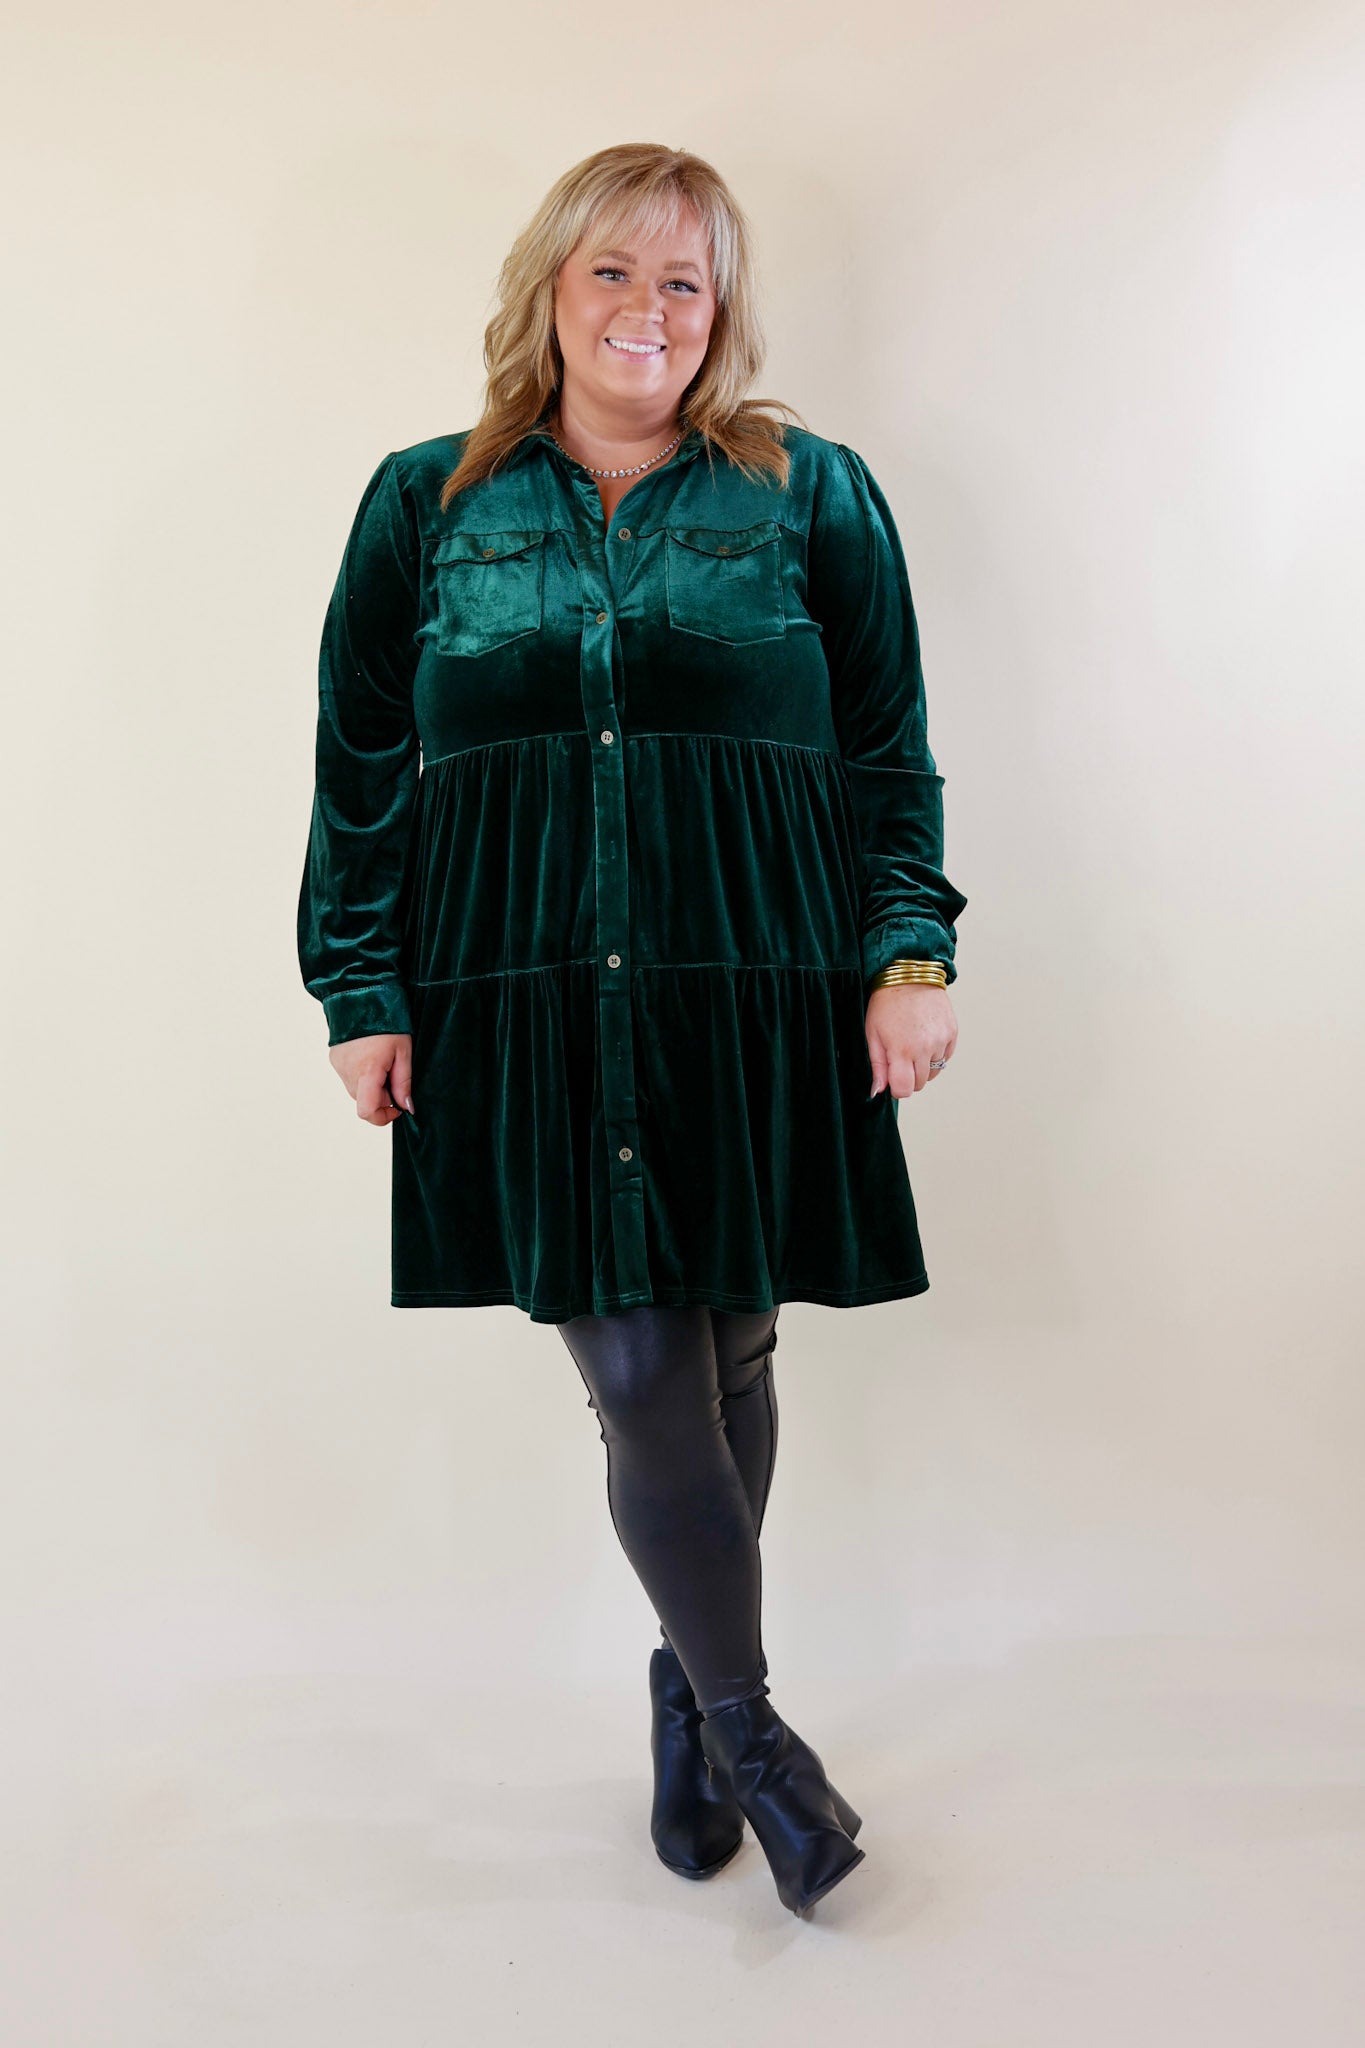 Grateful Gathering Velvet Button Up Dress with Long Sleeves in Emerald Green - Giddy Up Glamour Boutique